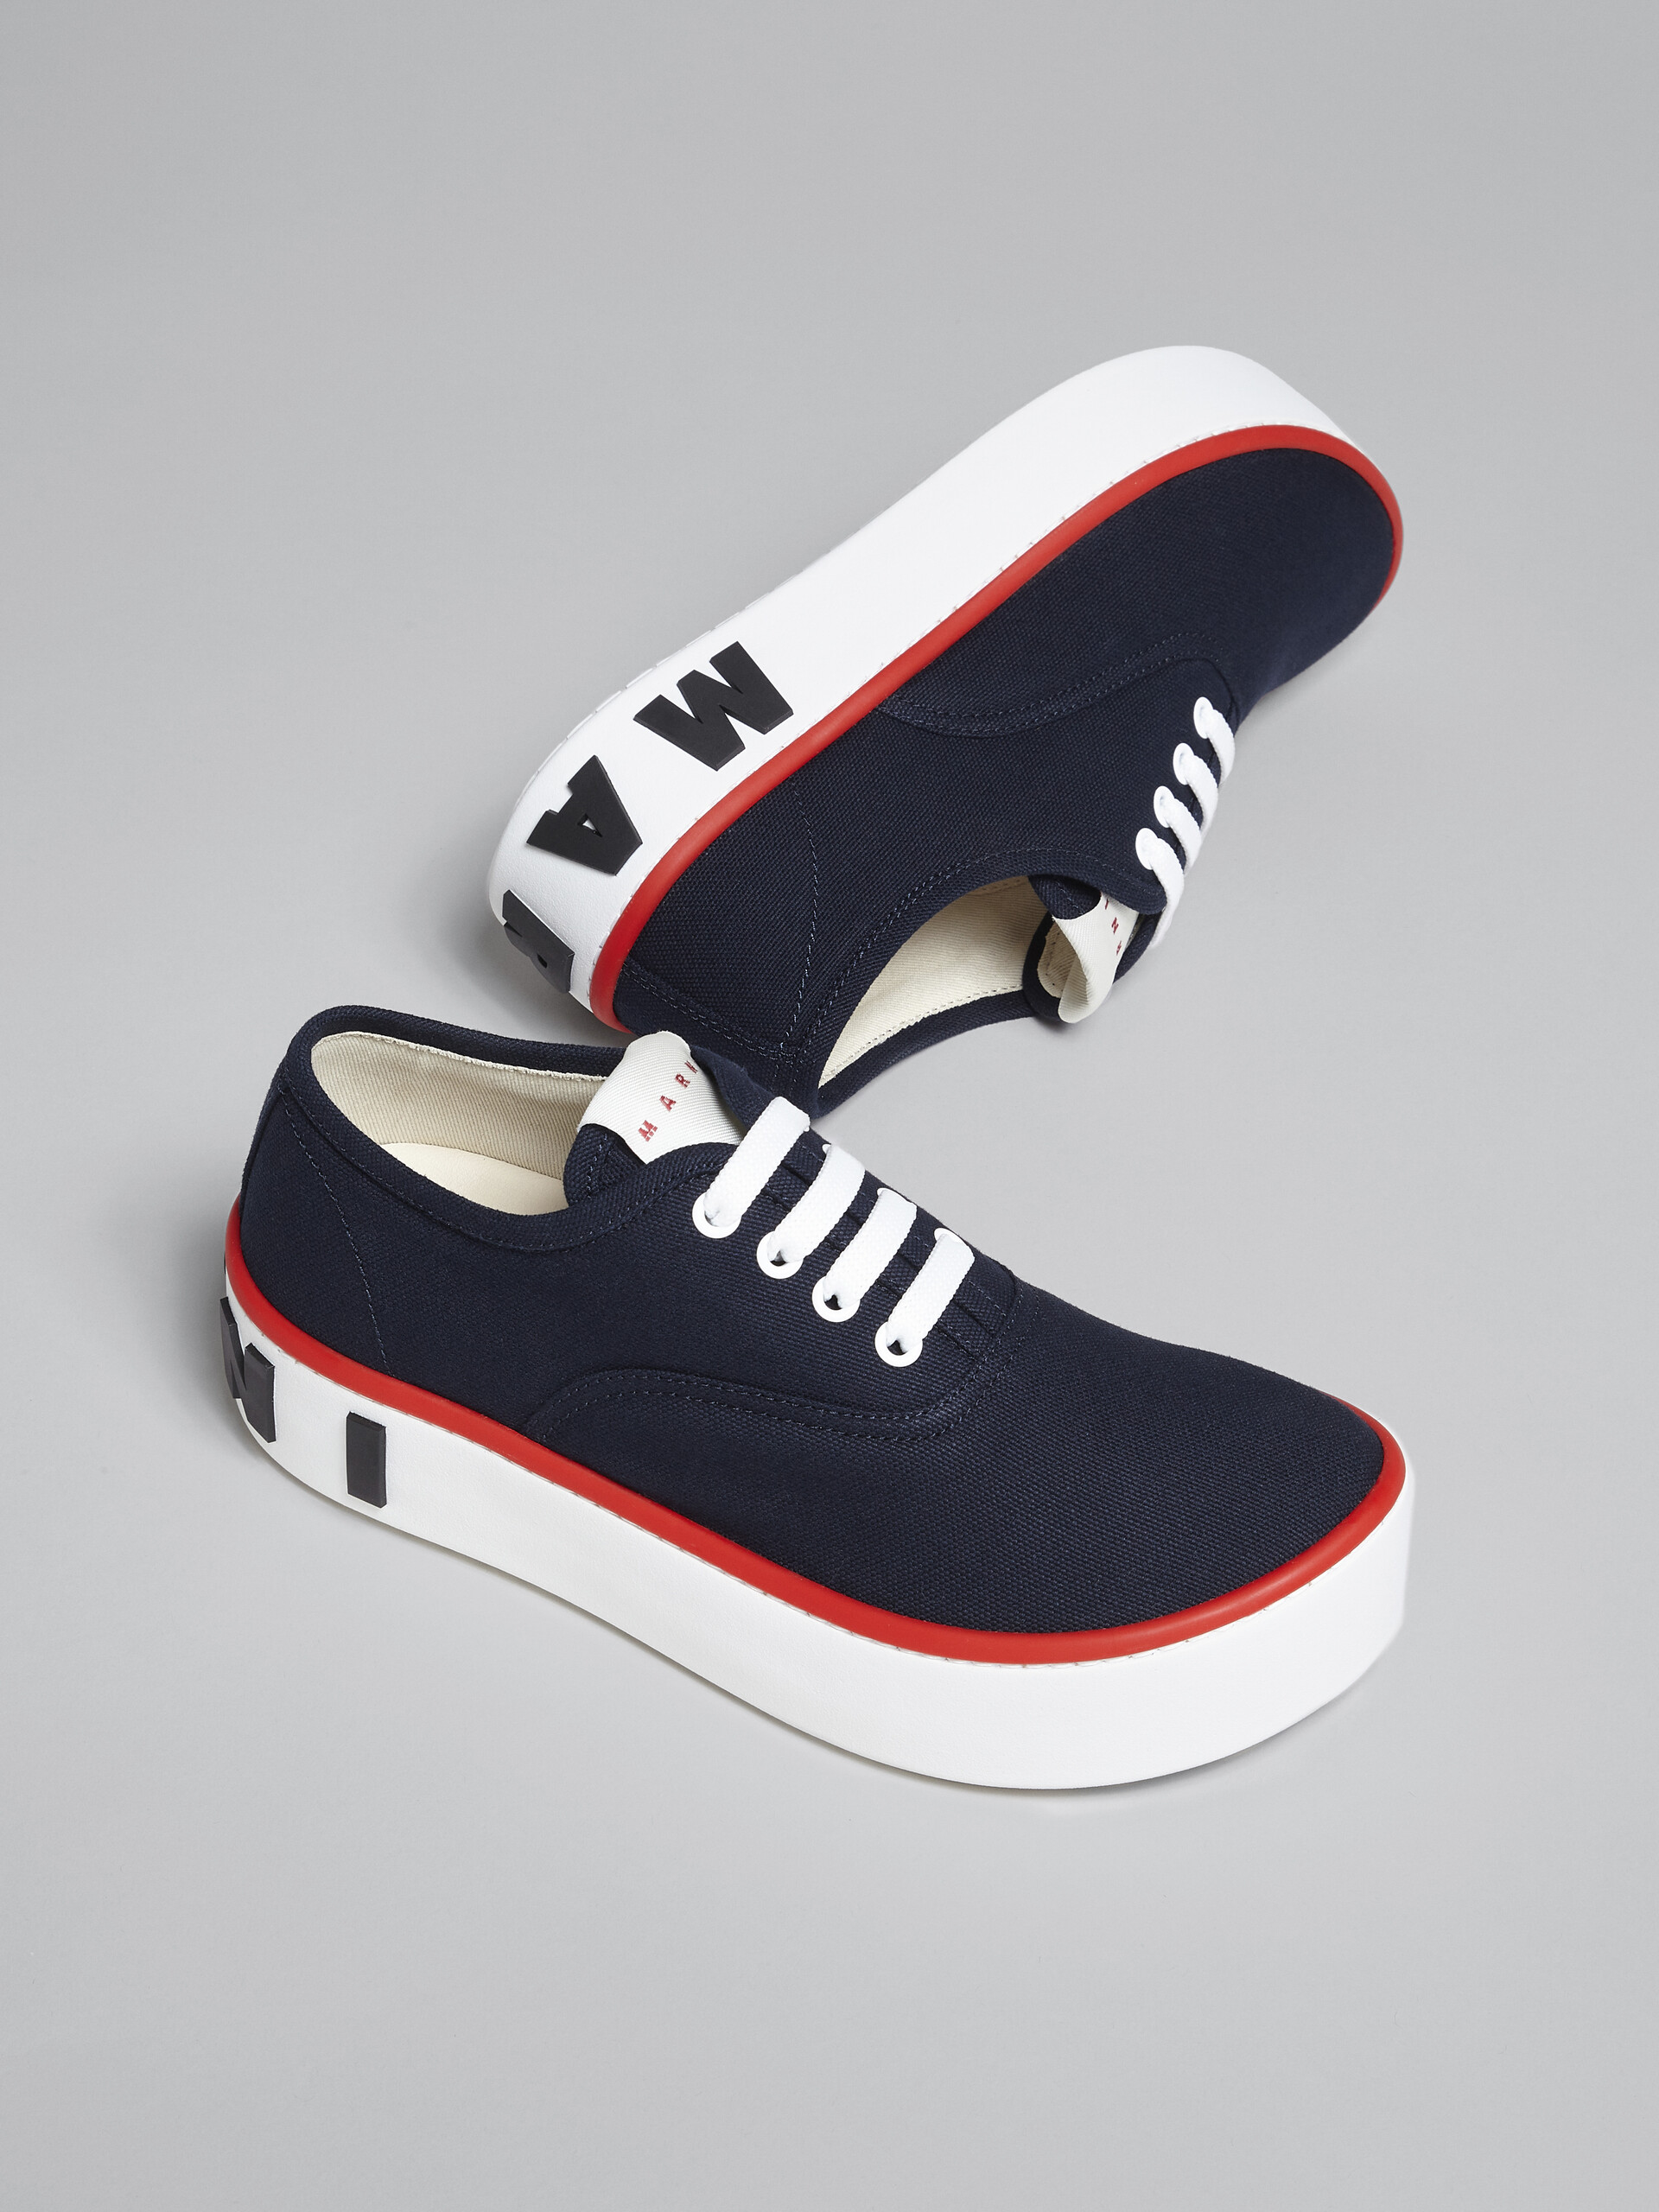 Blue canvas slip-on PAW sneaker with back maxi logo - Sneakers - Image 5